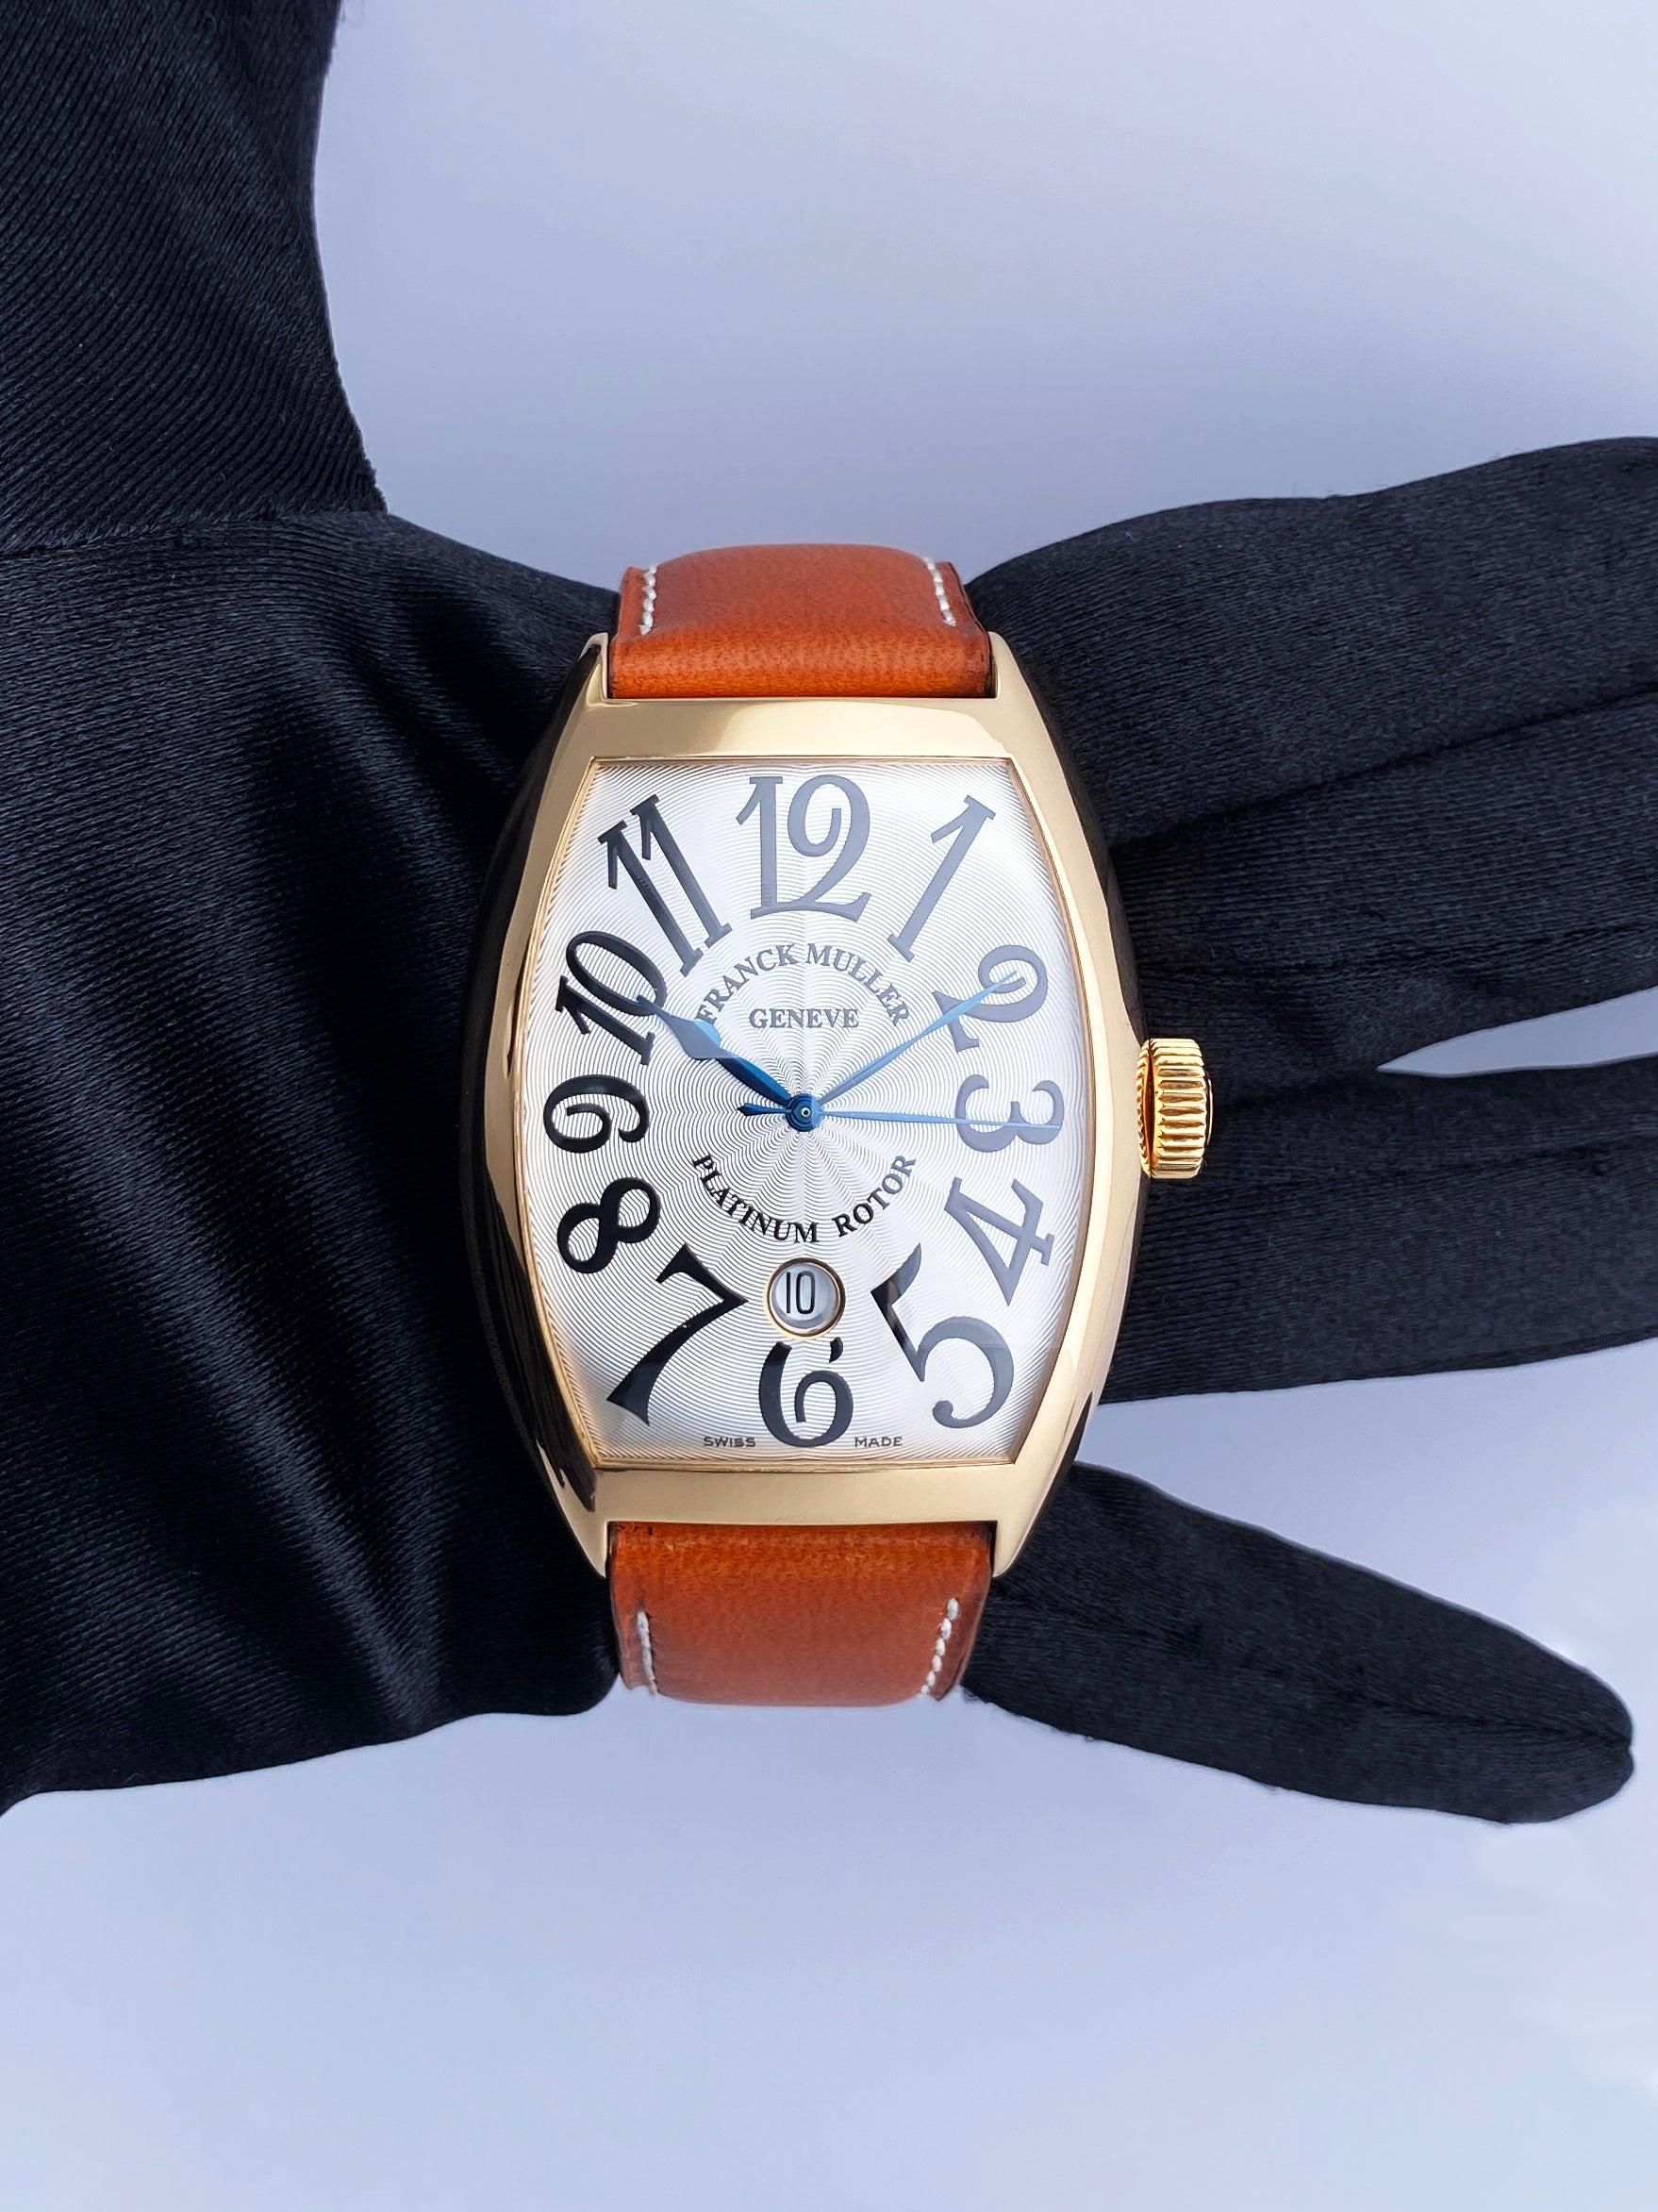 Franck Muller Master of Complications 8880 SC DT Watch. 39mm 18K rose gold case. 18K rose gold smooth bezel. Sliver dial with blue steel hands and Arabic numeral hour markers. Date display at 6 o'clock position. Brown leather strap with 18K rose